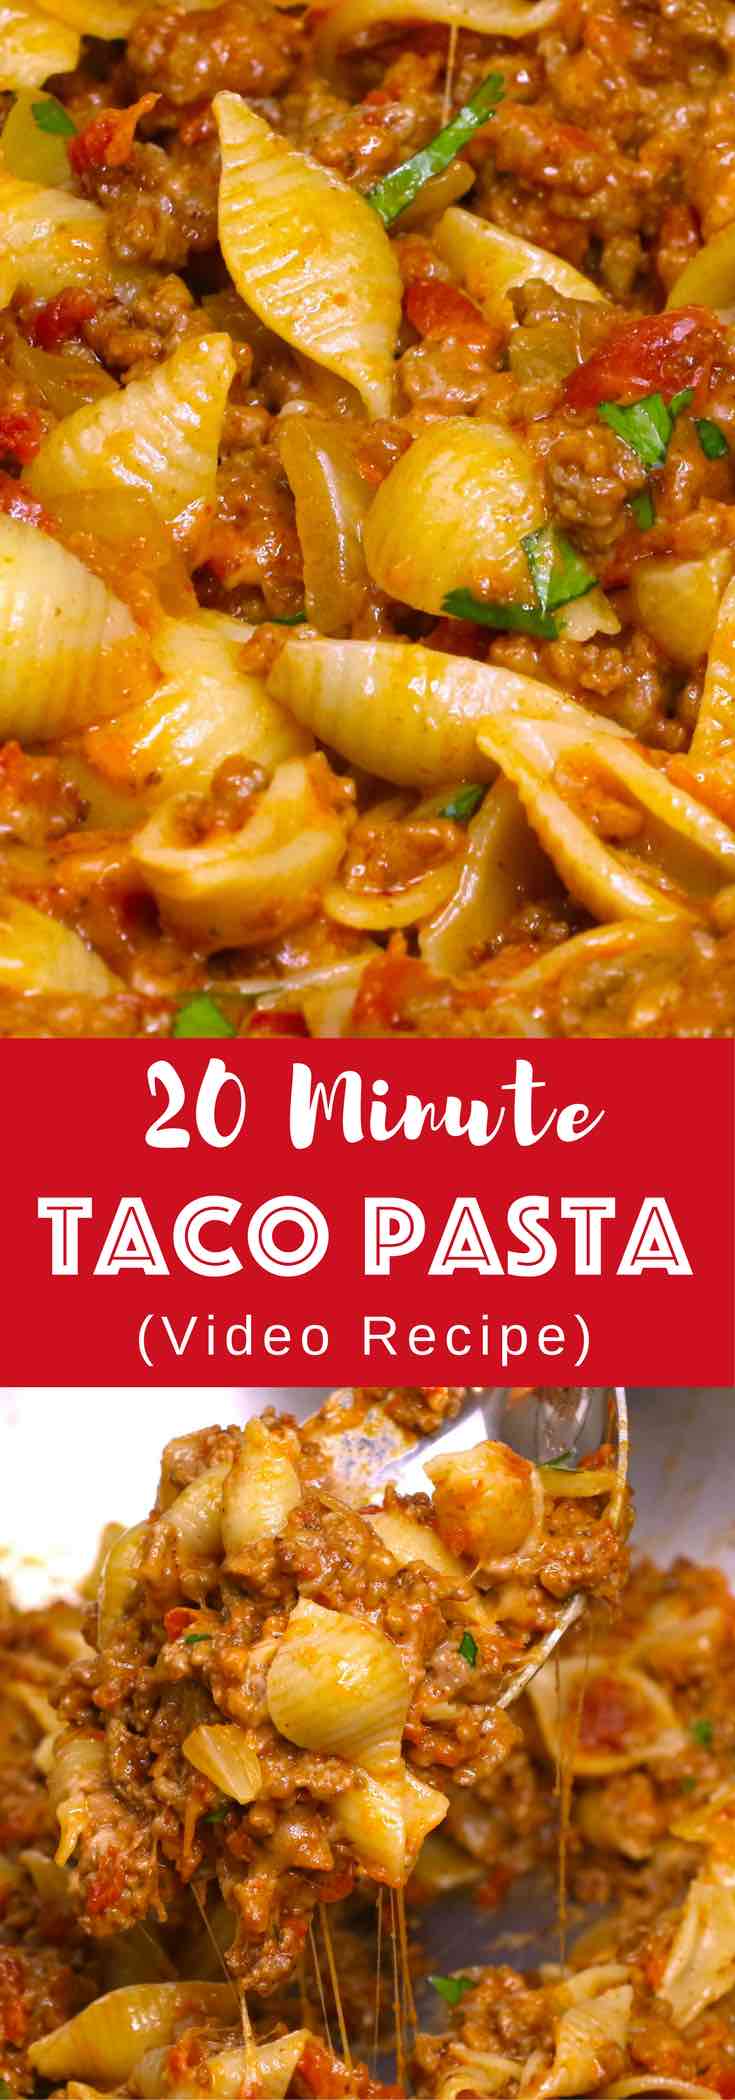 One-pot Cheesy Taco Pasta – One of the easiest quick dinner recipes. It’s loaded with ground beef and shredded cheddar cheese. So delicious. This simple and easy recipe comes together in 20 minutes. Quick and easy recipe. Video recipe.